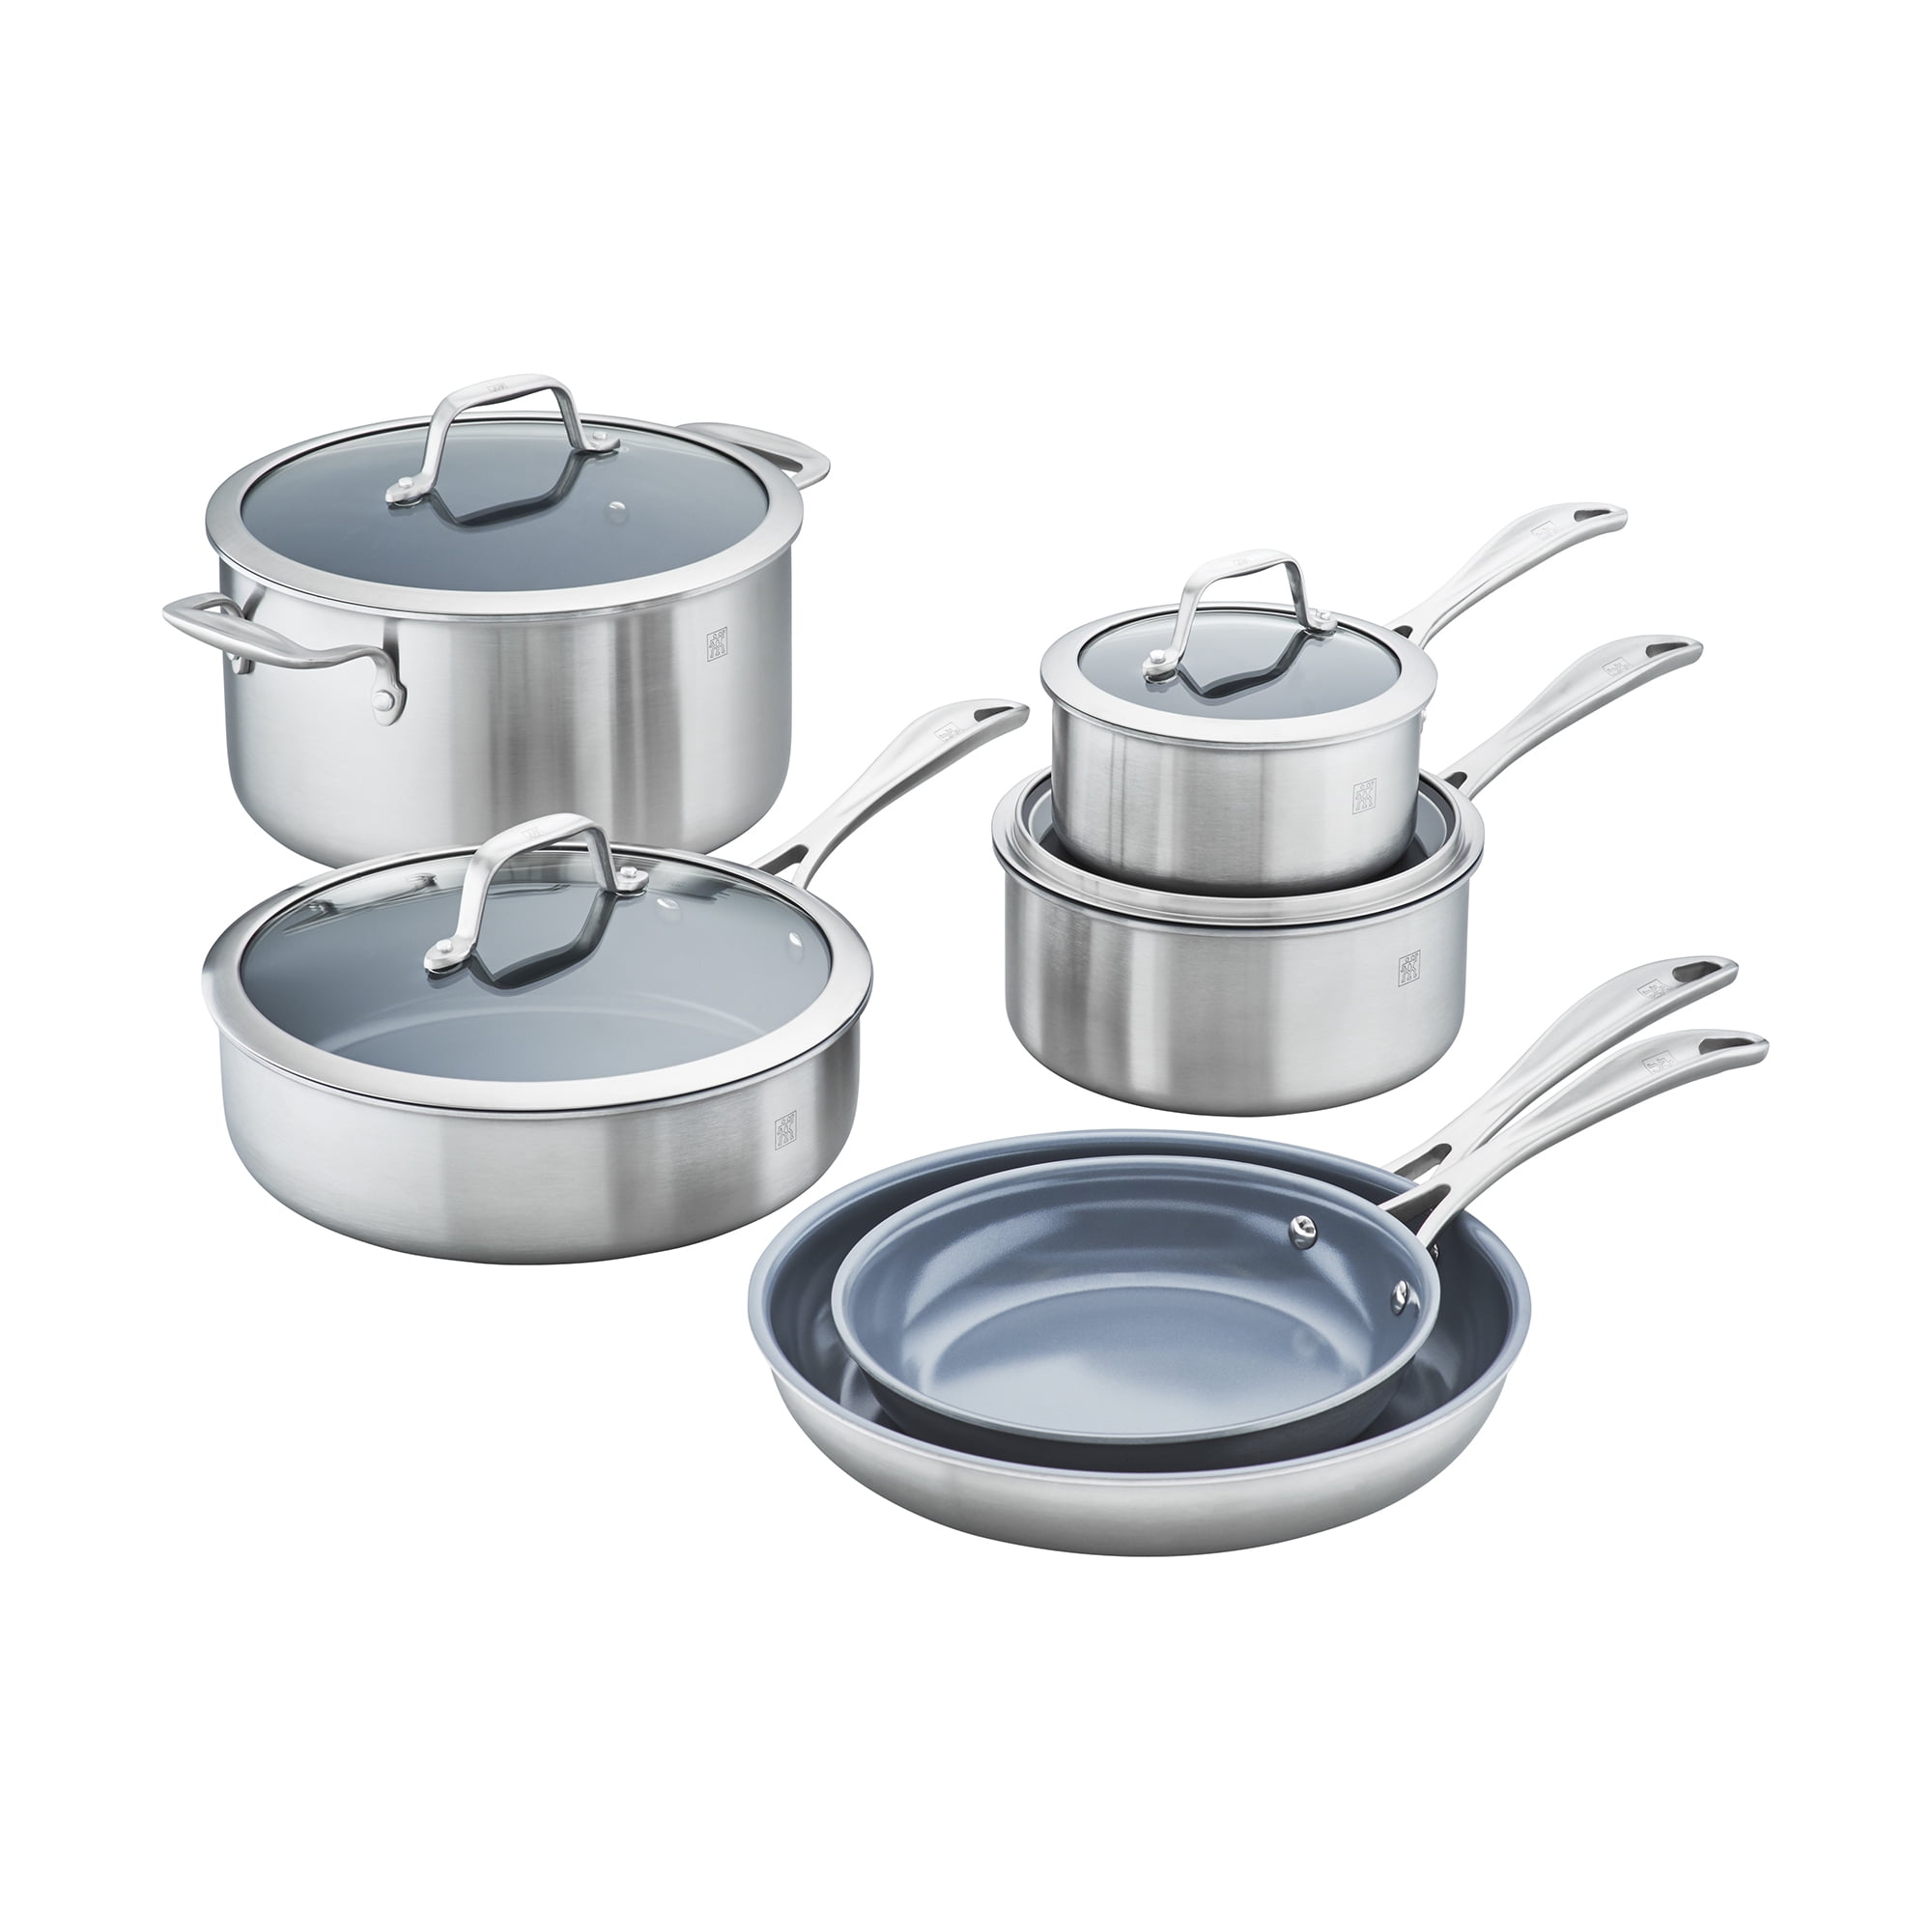 Zwilling Spirit Cookware Set - Product Review After Using for 18 Months